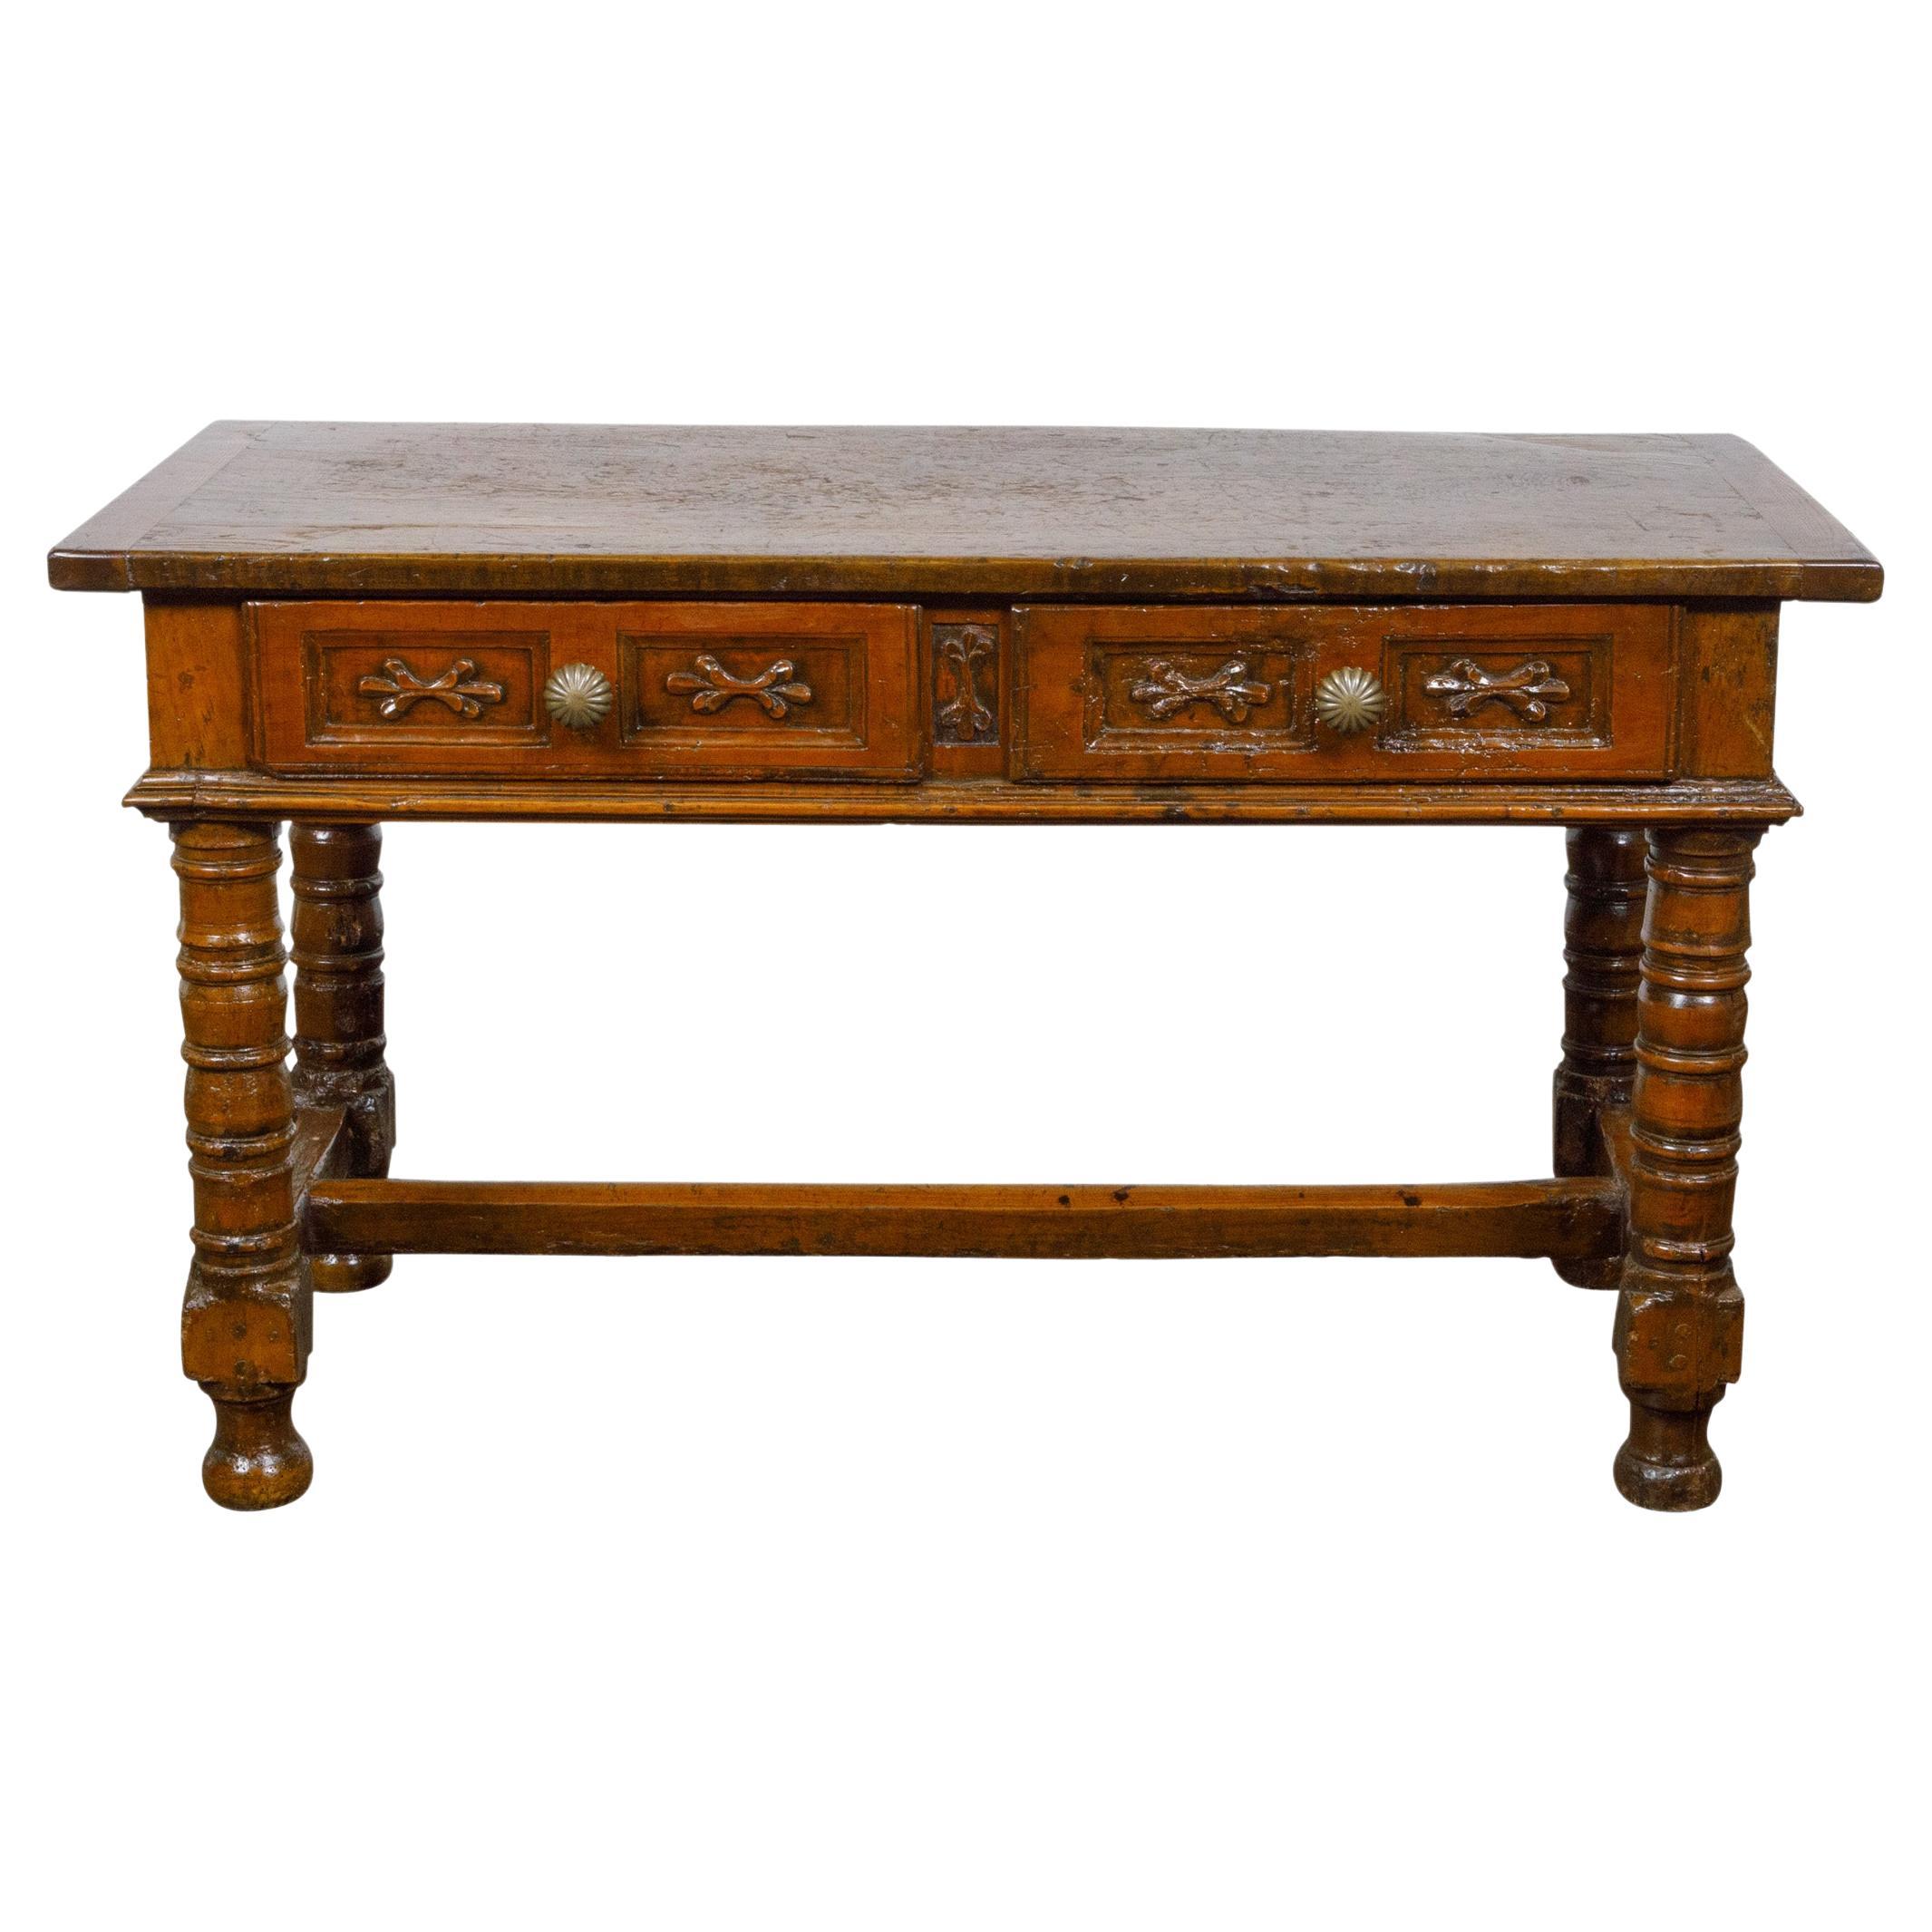 18th Century Spanish Walnut Console Table with Carved Drawers and Baluster Legs For Sale